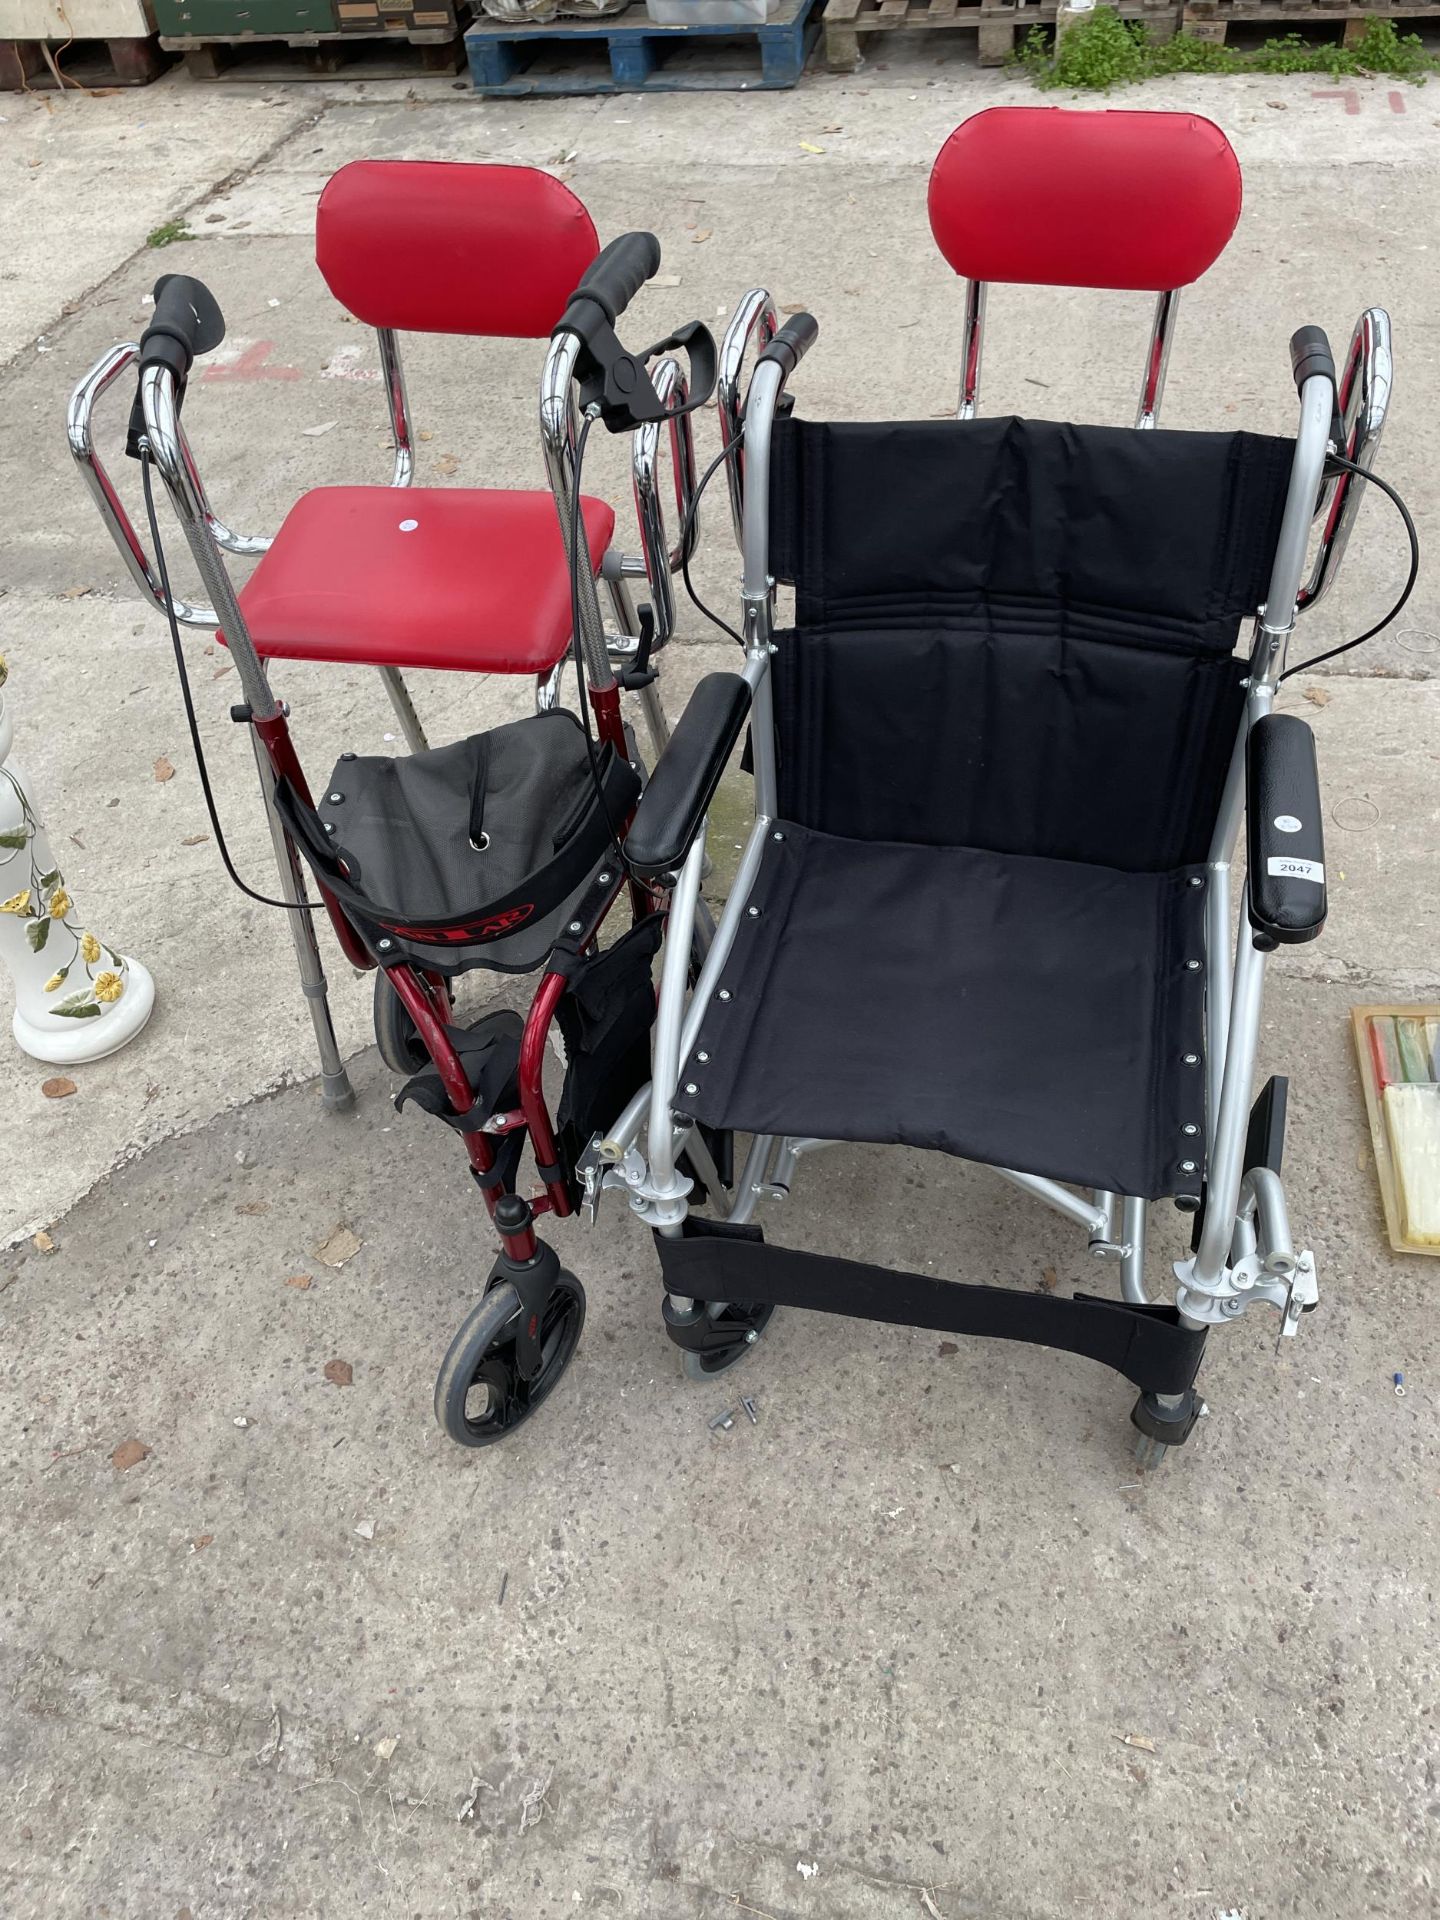 TWO STOOLS, A WHEEL CHAIR AND A WALKING AID ETC